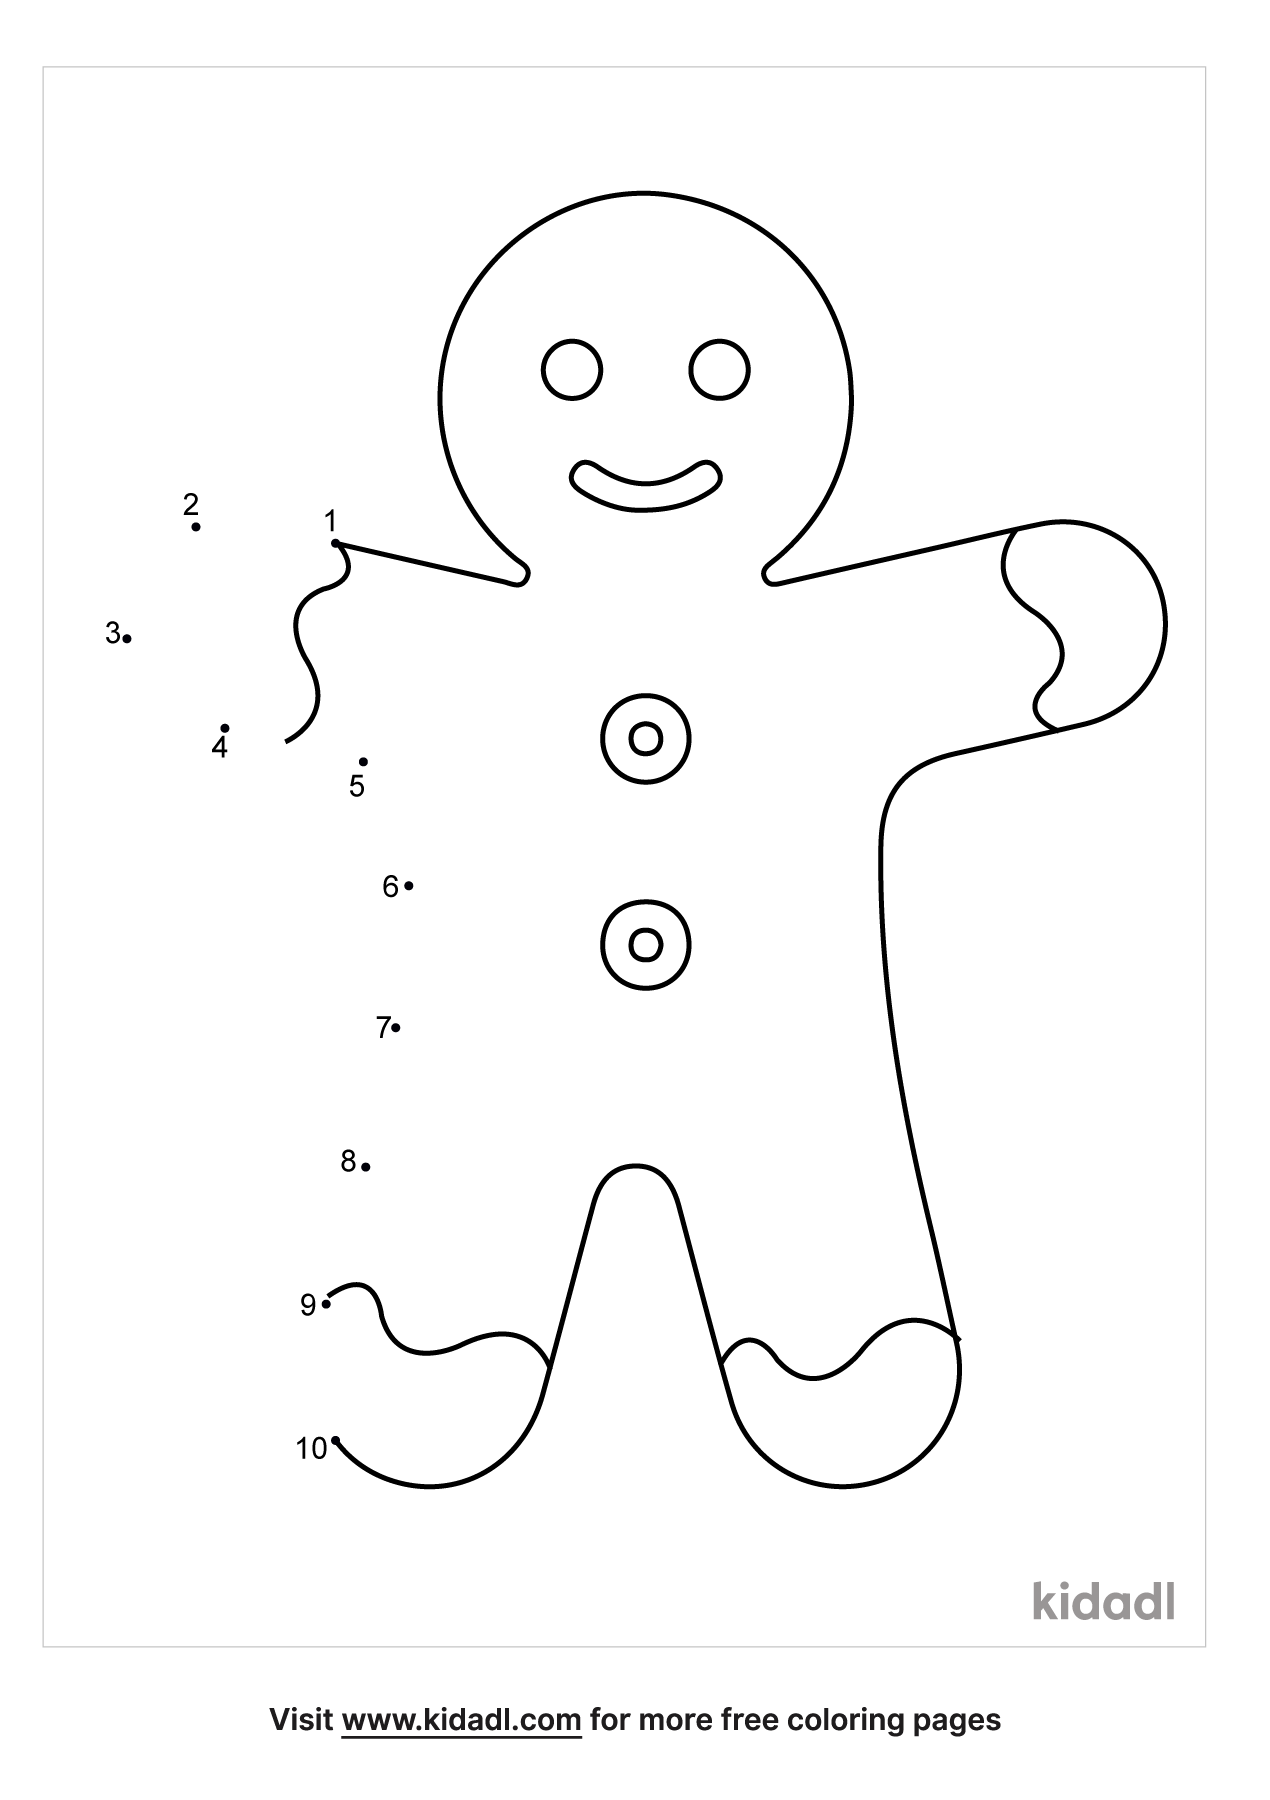 Free Gingerbread Man Easy 1 10 Dot To Dot Printables For Kids Kidadl Coloring Home